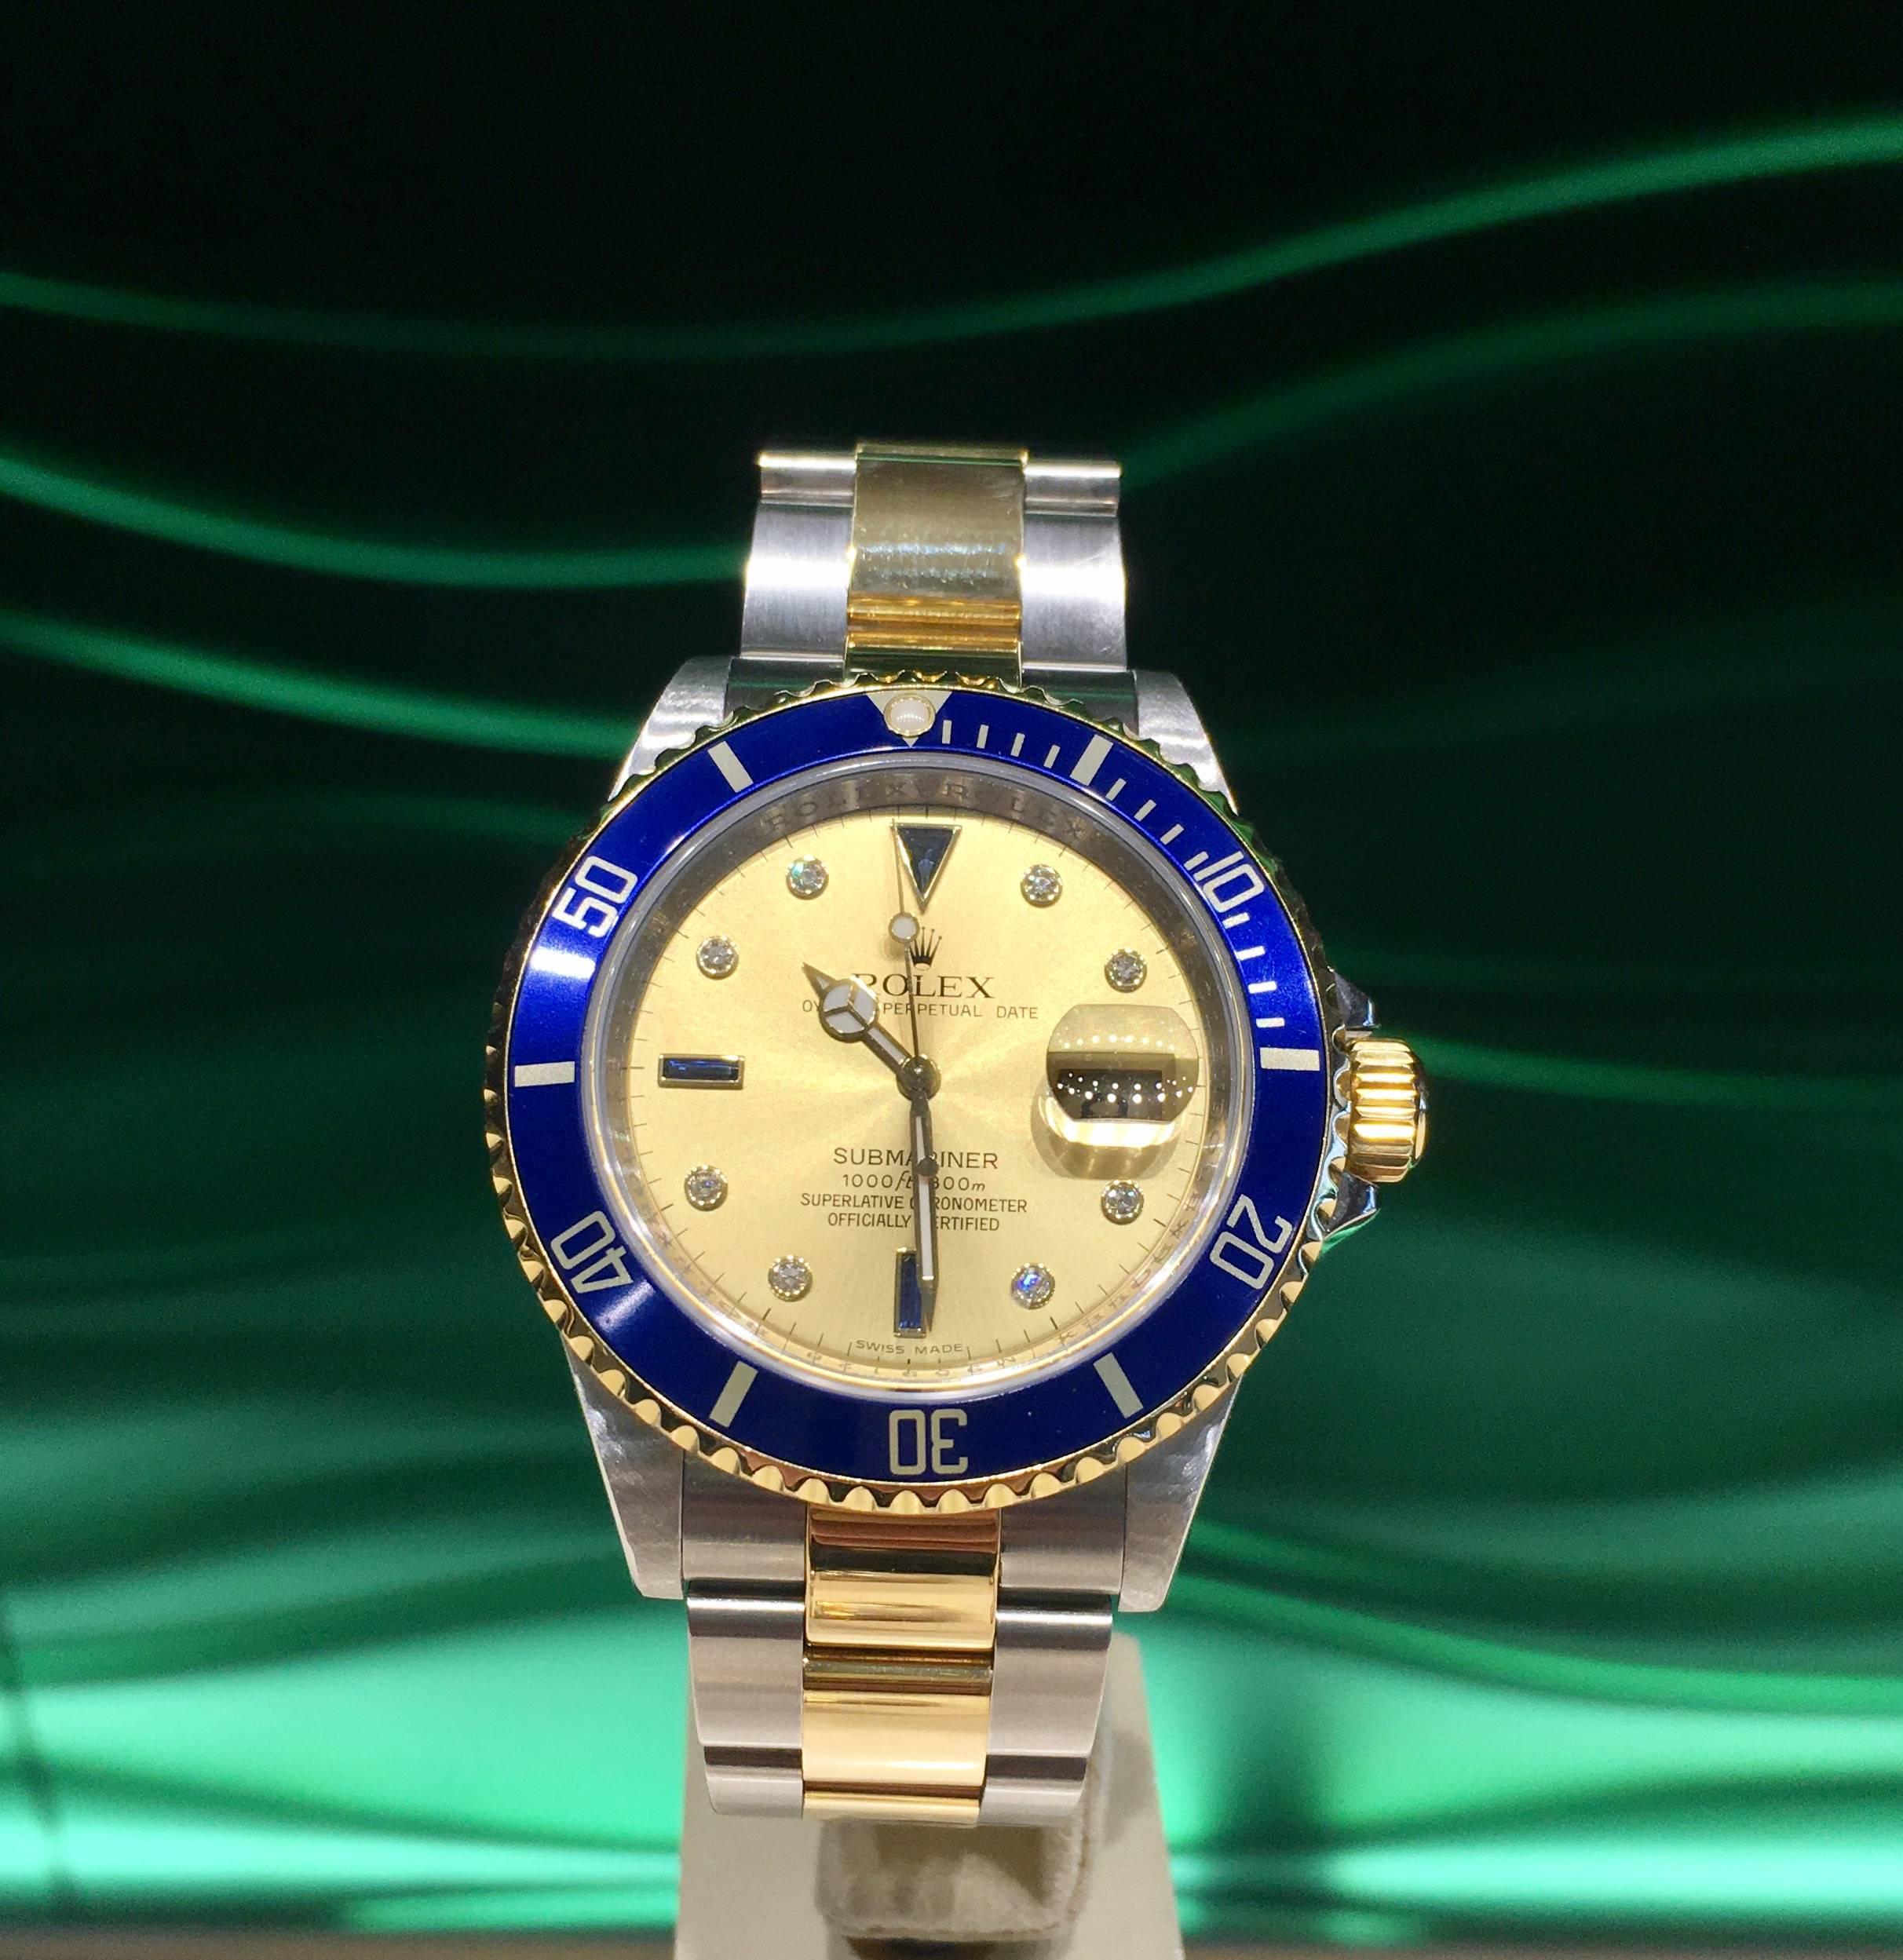 Pre-owned Rolex O. P Submariner Date with yellow gold and stainless steel, 40 mm case, blue insert, 20mm rolesor oyster fliplock bracelet, champagne dial with 8 round brilliants, three sapphires model # 16613  serial # M9591_ _, comes with box.

